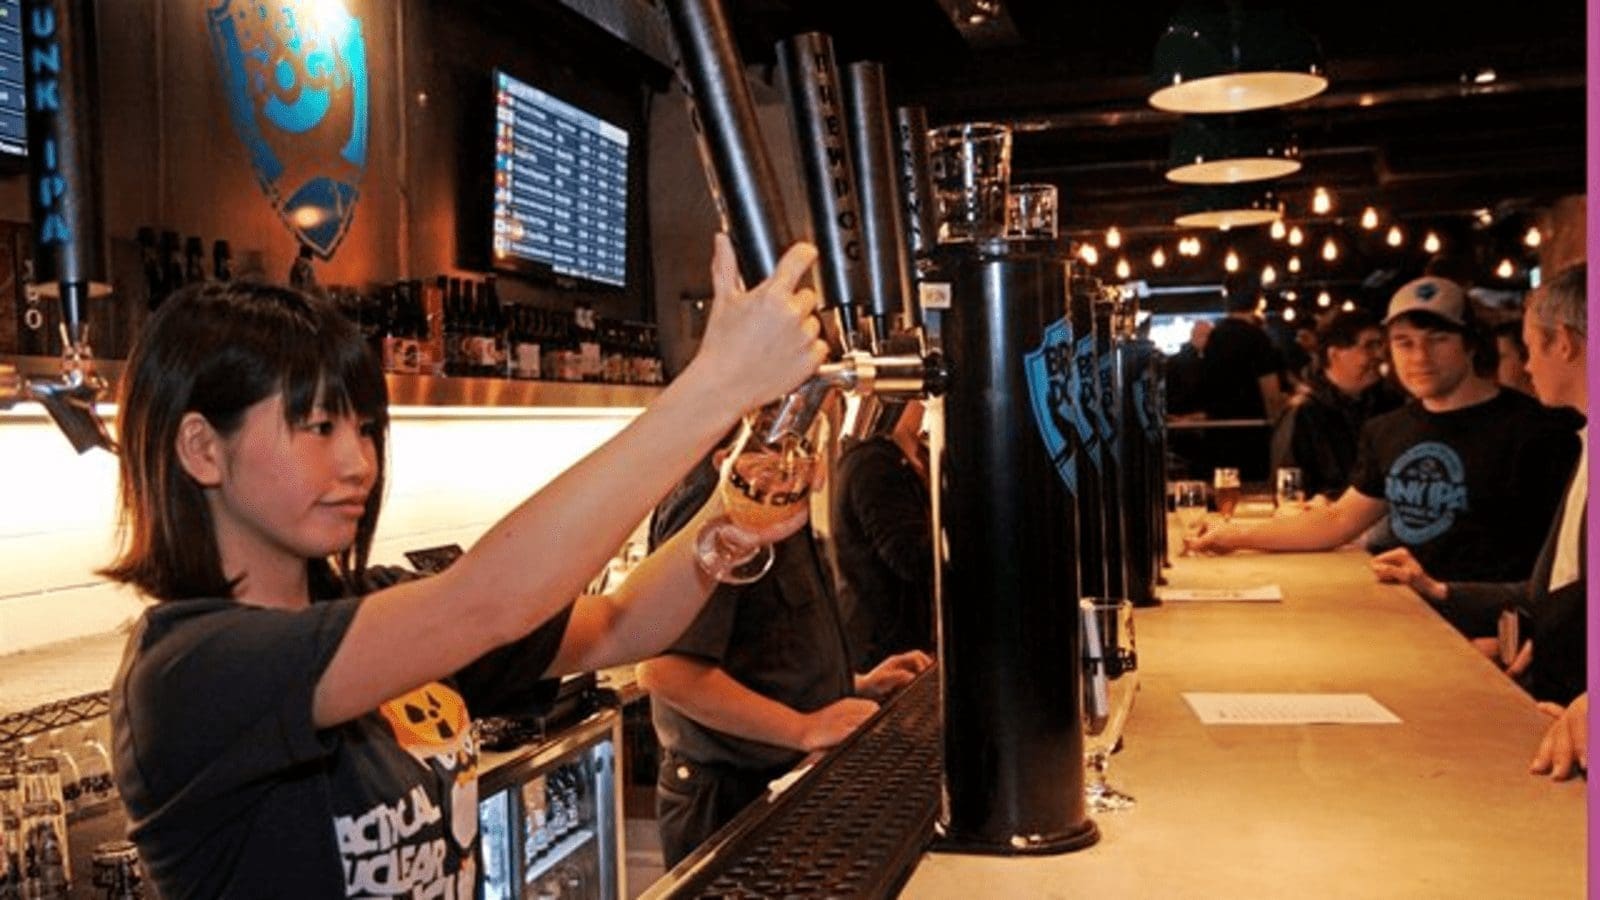 IPO bound craft beer company Brewdog raises record US$42m in online equity crowdfunding round